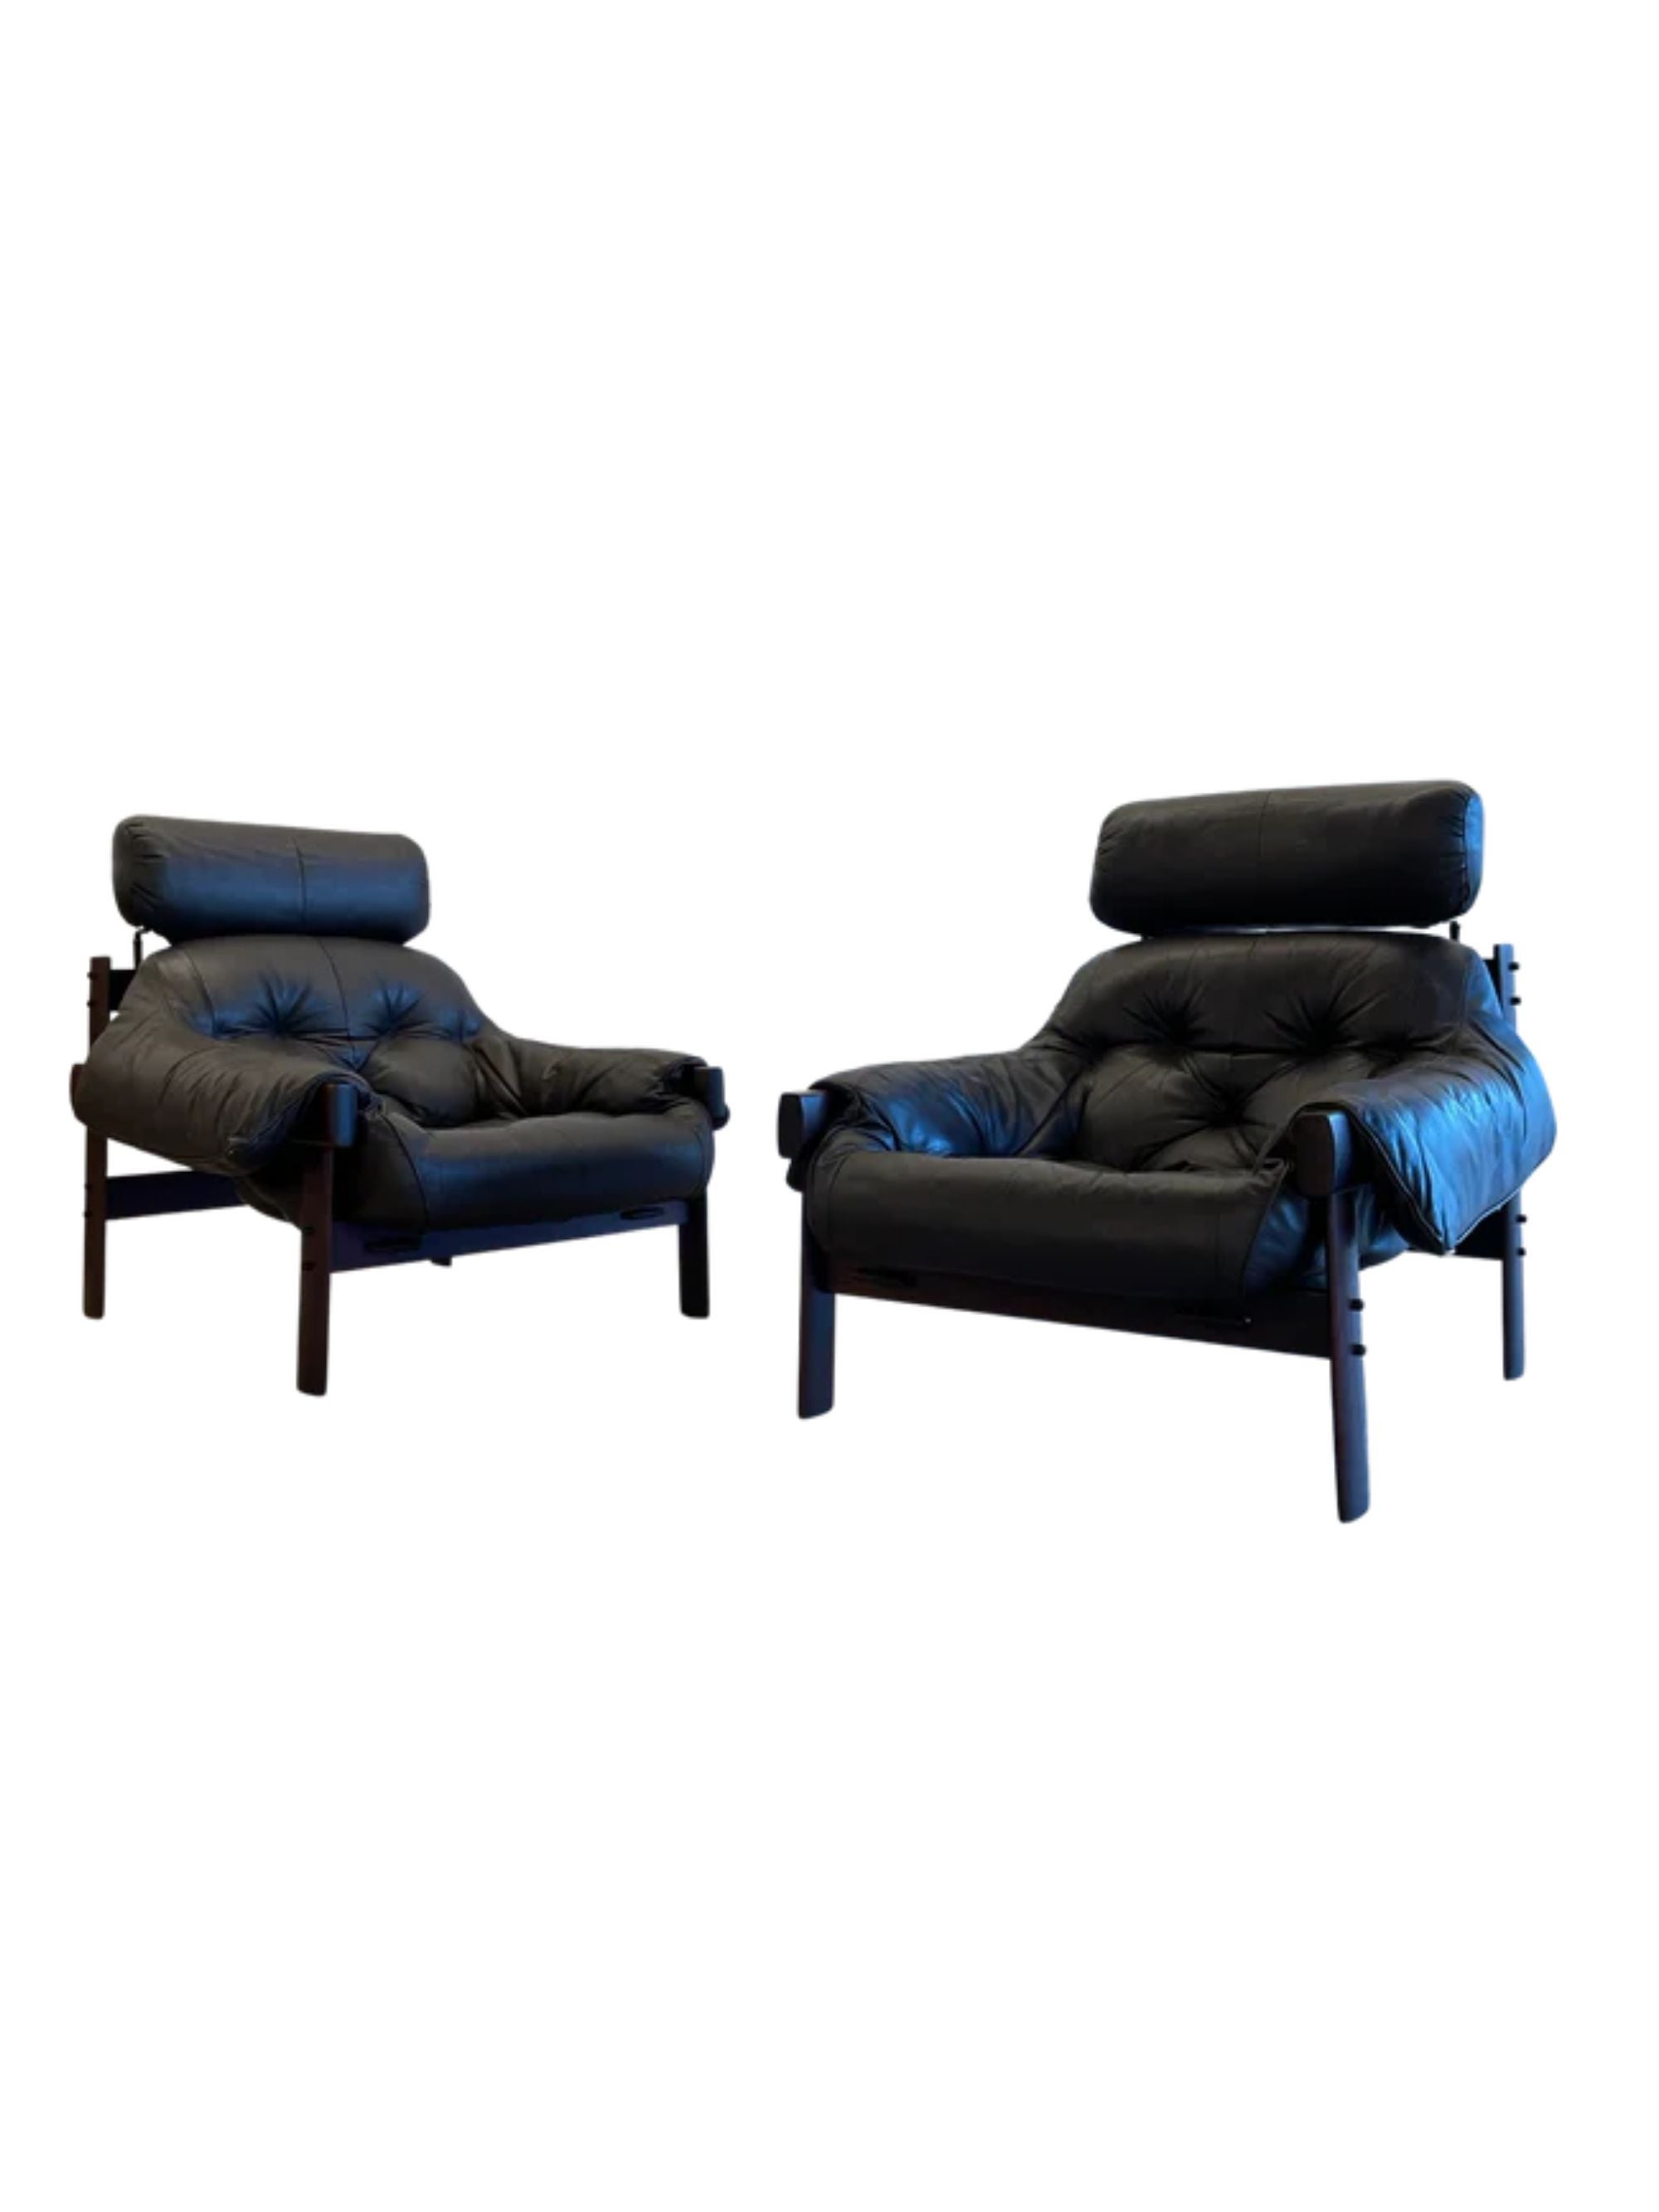 Rare Pair of Lounge Chairs in Leather and Jacaronda by Percival Lafer, 1970s